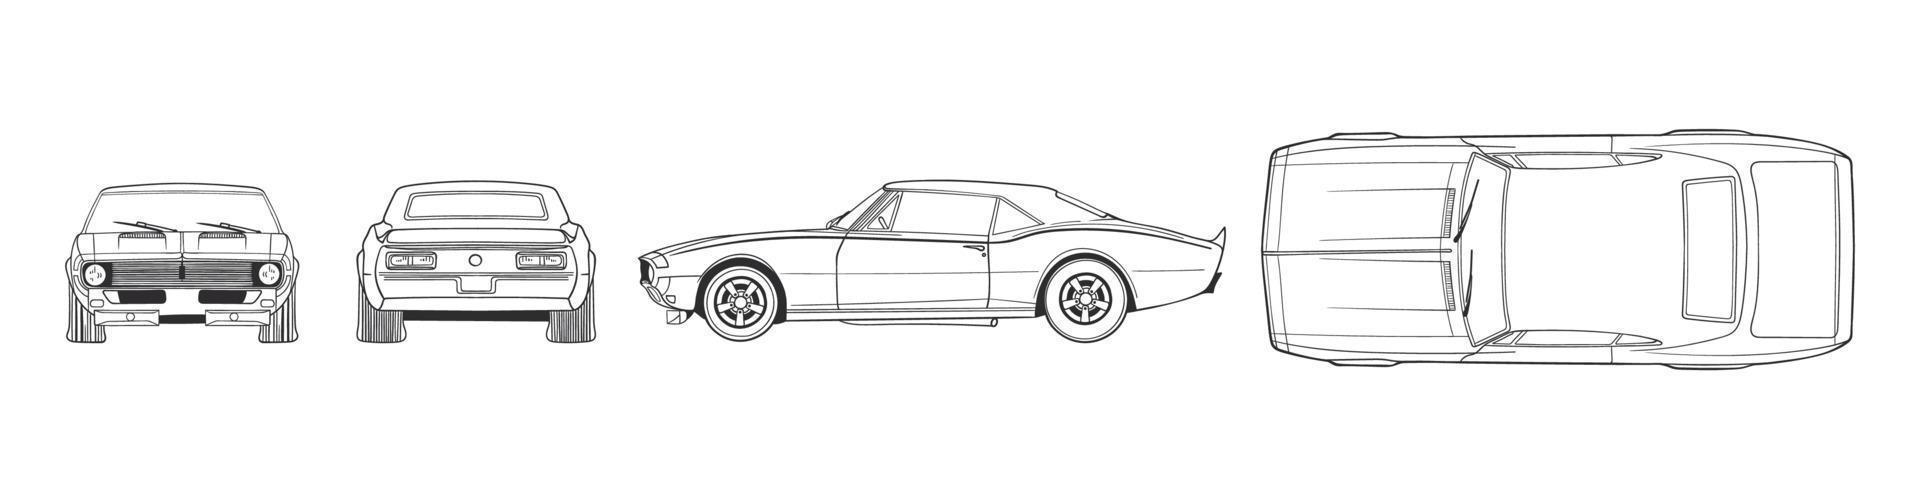 Retro sport car. Hand drawn car front back top and side view. Vector illustration